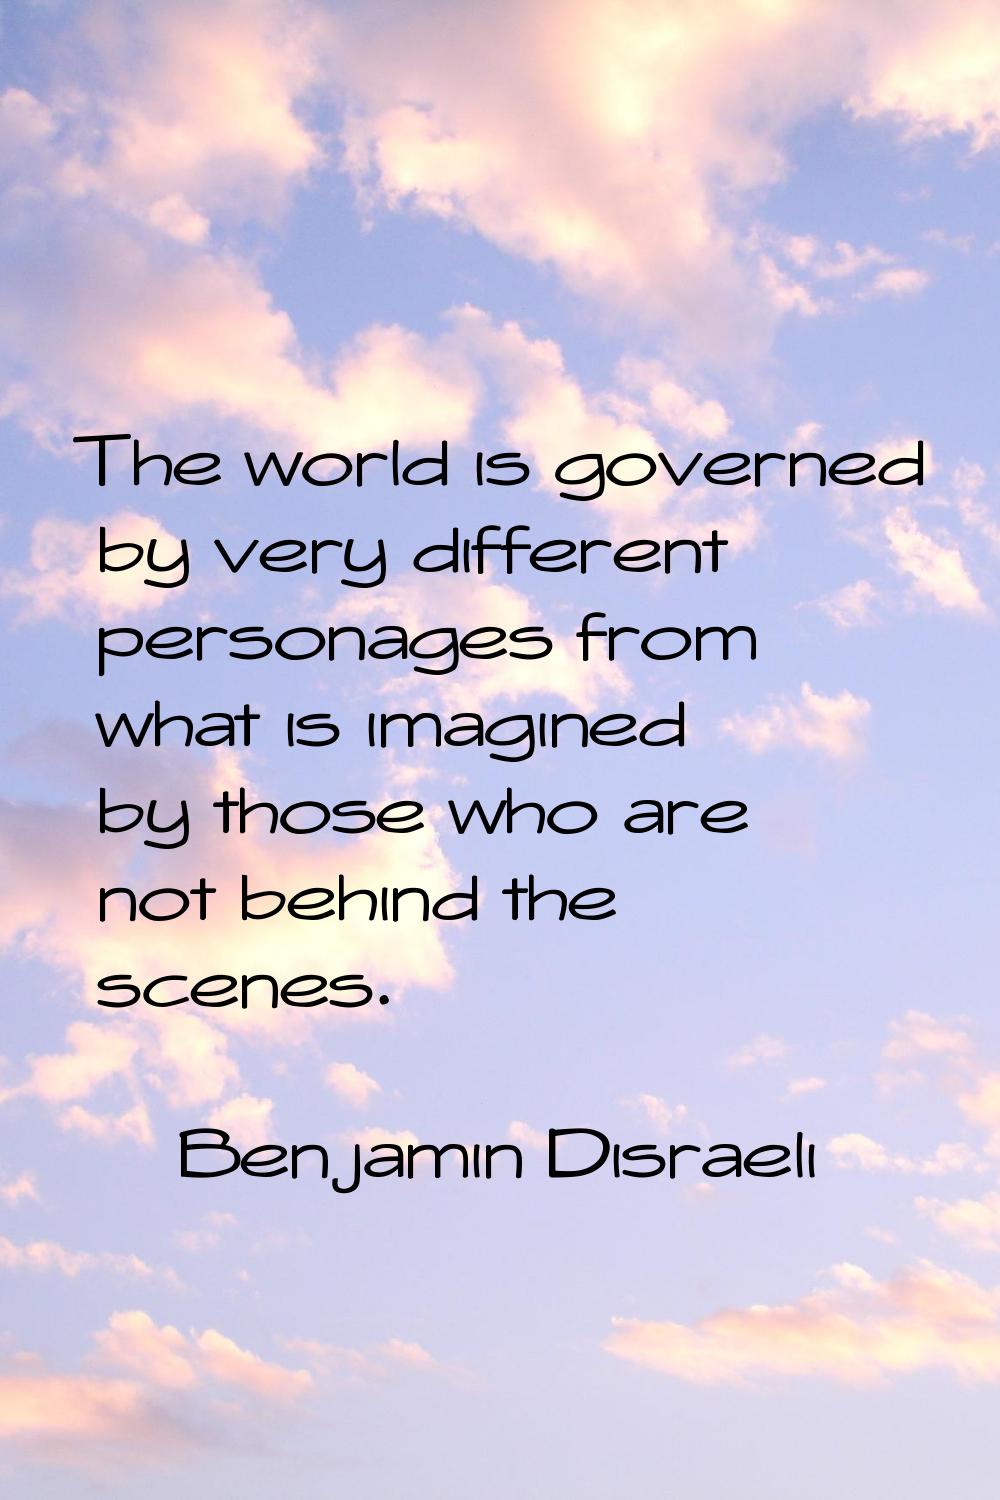 The world is governed by very different personages from what is imagined by those who are not behin